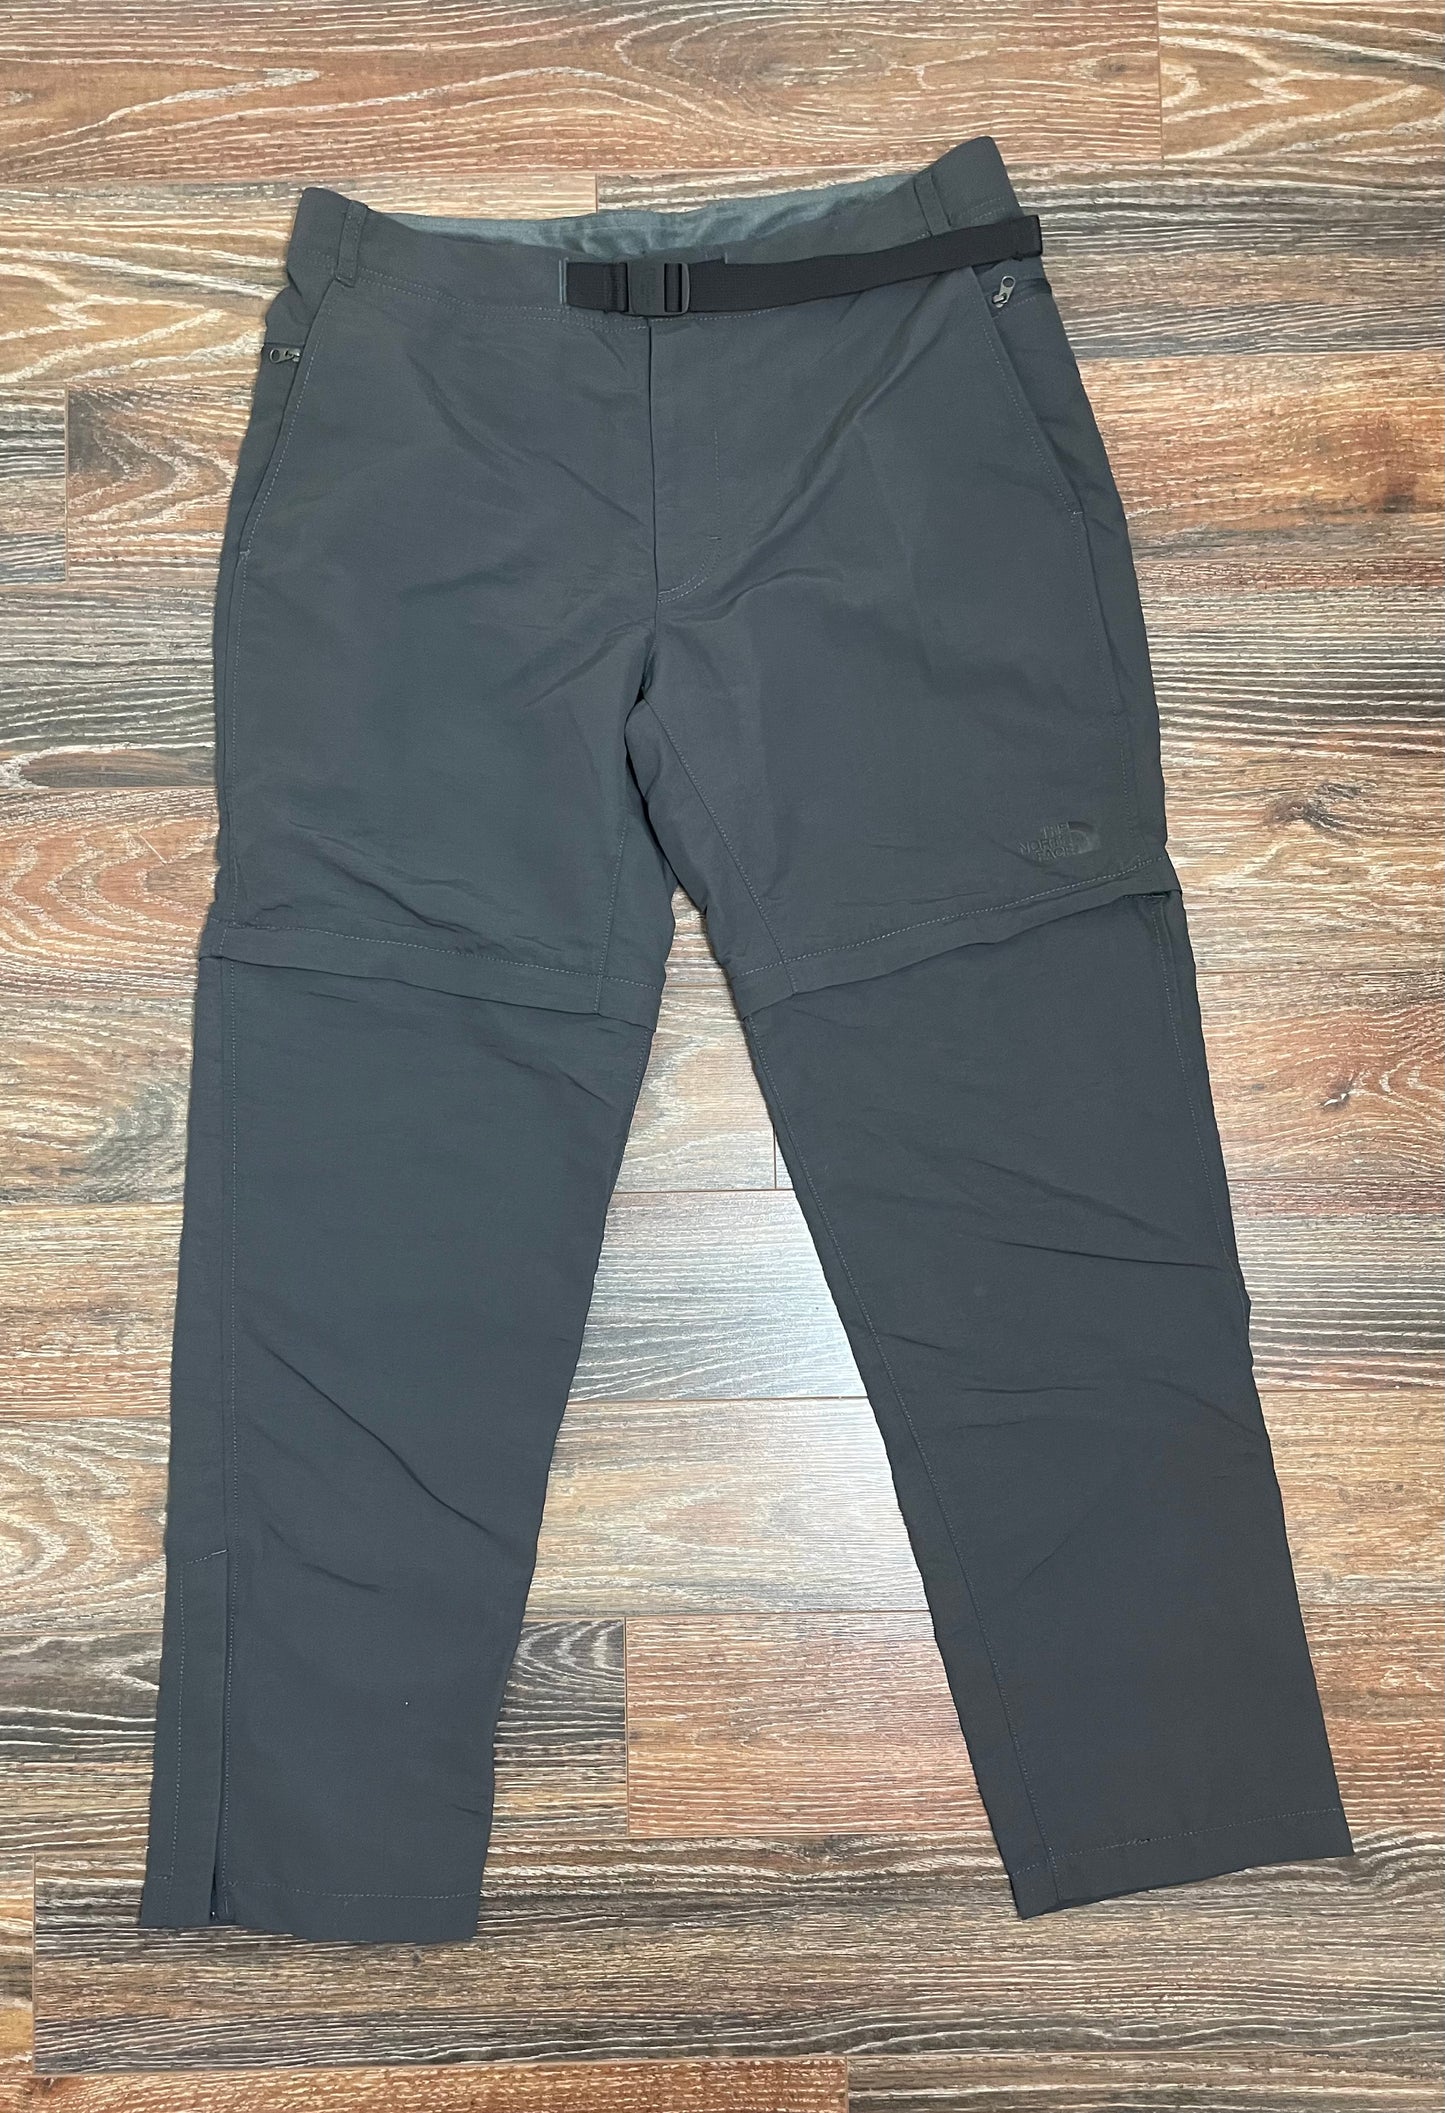 Versatile and Stylish: The North Face Paramount II Convertible Pant